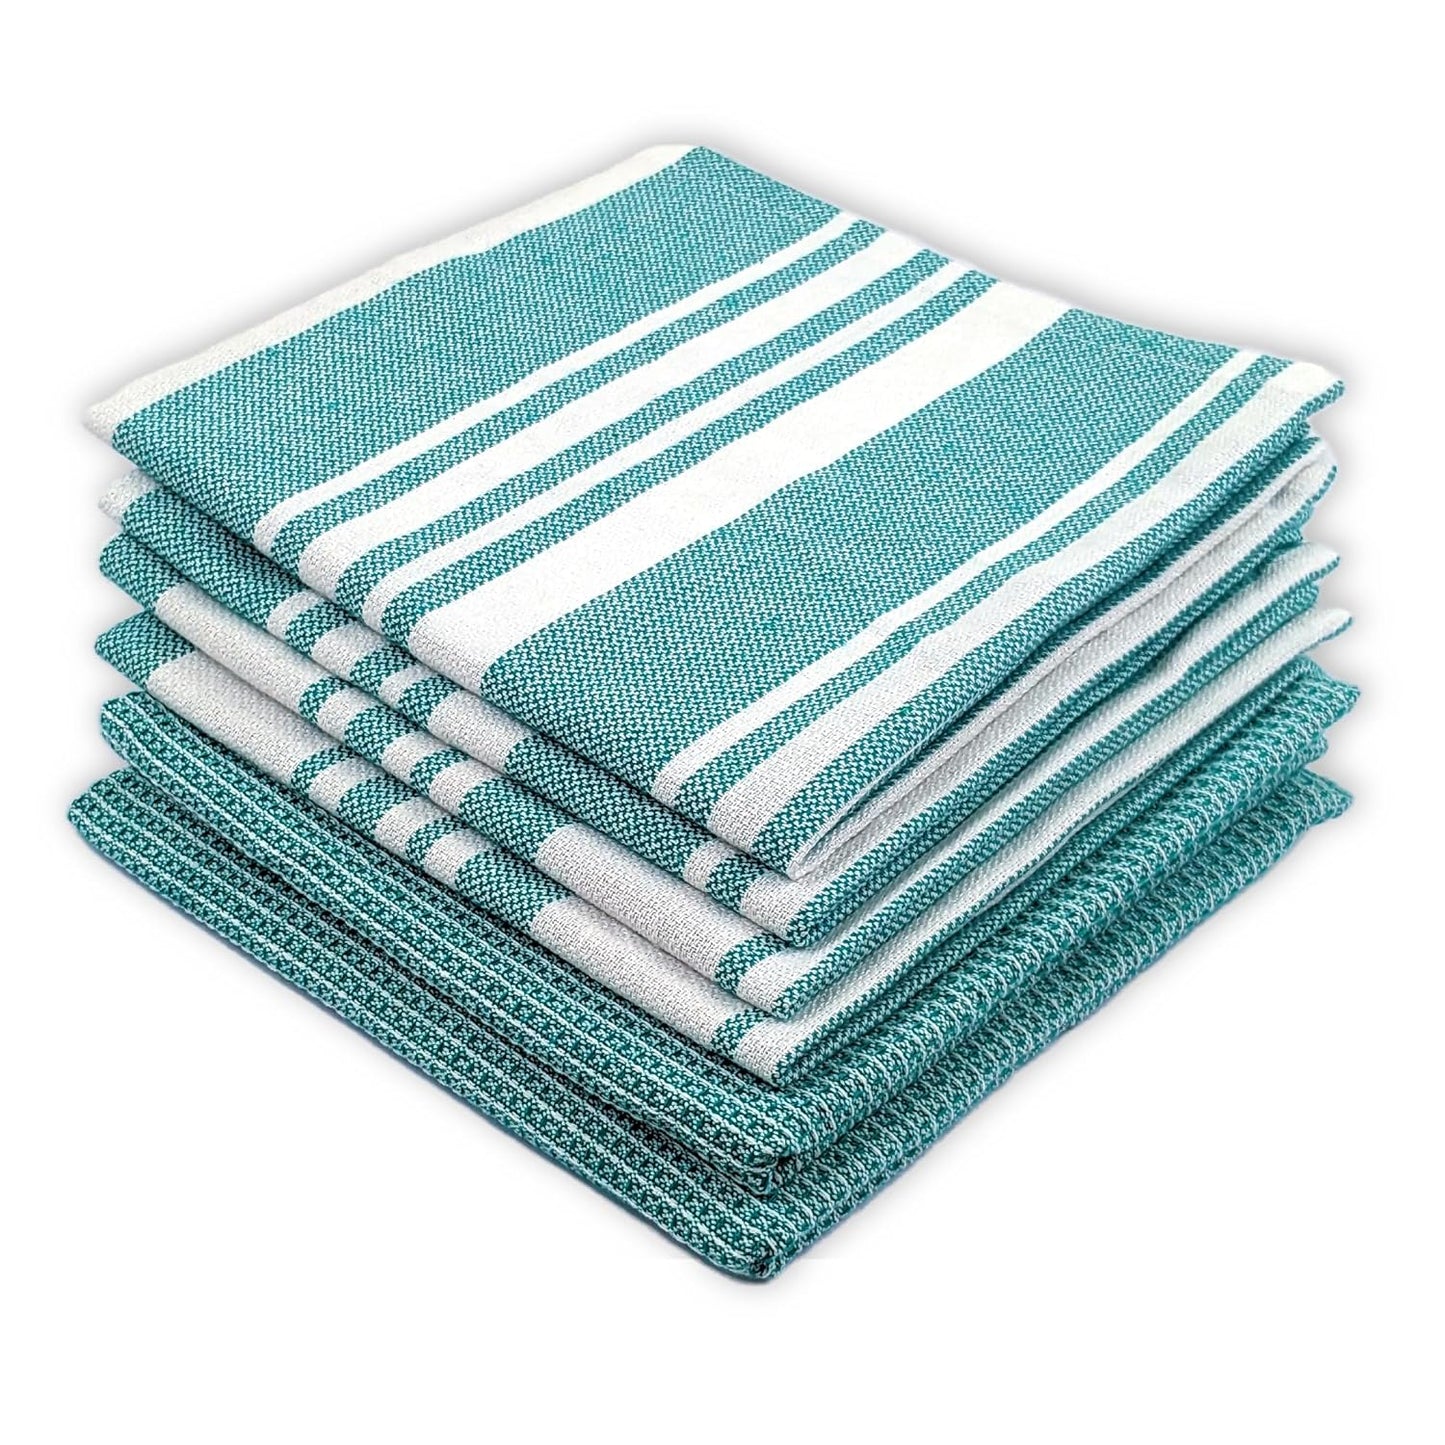 IndiHaus Cotton Multi-Purpose Kitchen Hand Towels | Waffle & Stripes | (Large 60 x 40 cm) Lunch, Dish Towel (Set of 4, Ocean Teal)